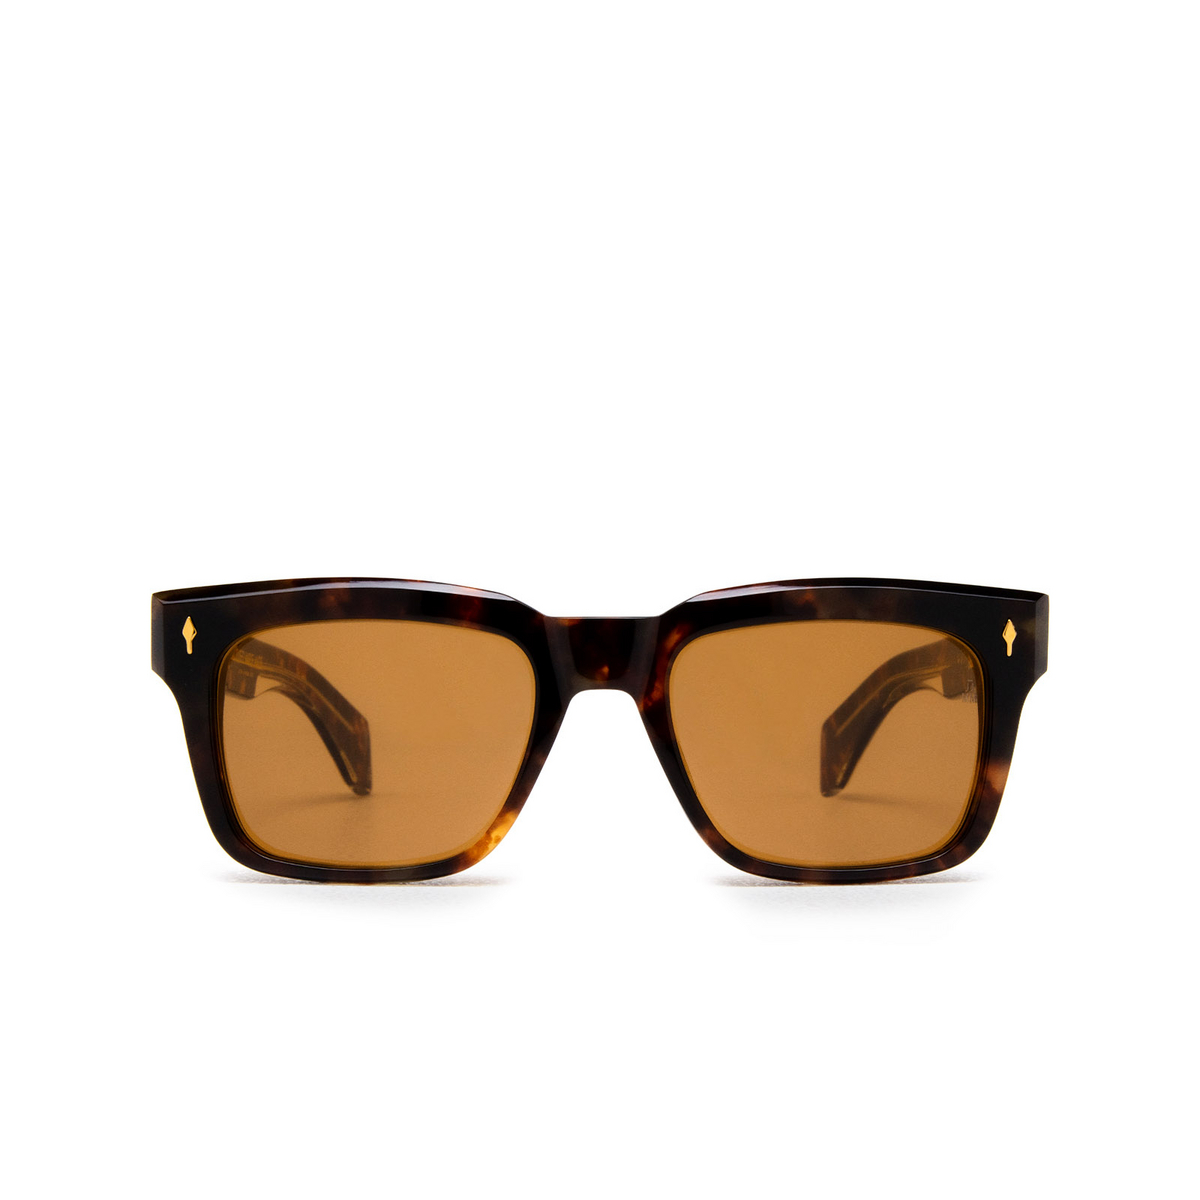 Jacques Marie Mage TORINO Sunglasses HAVANA 6 - front view